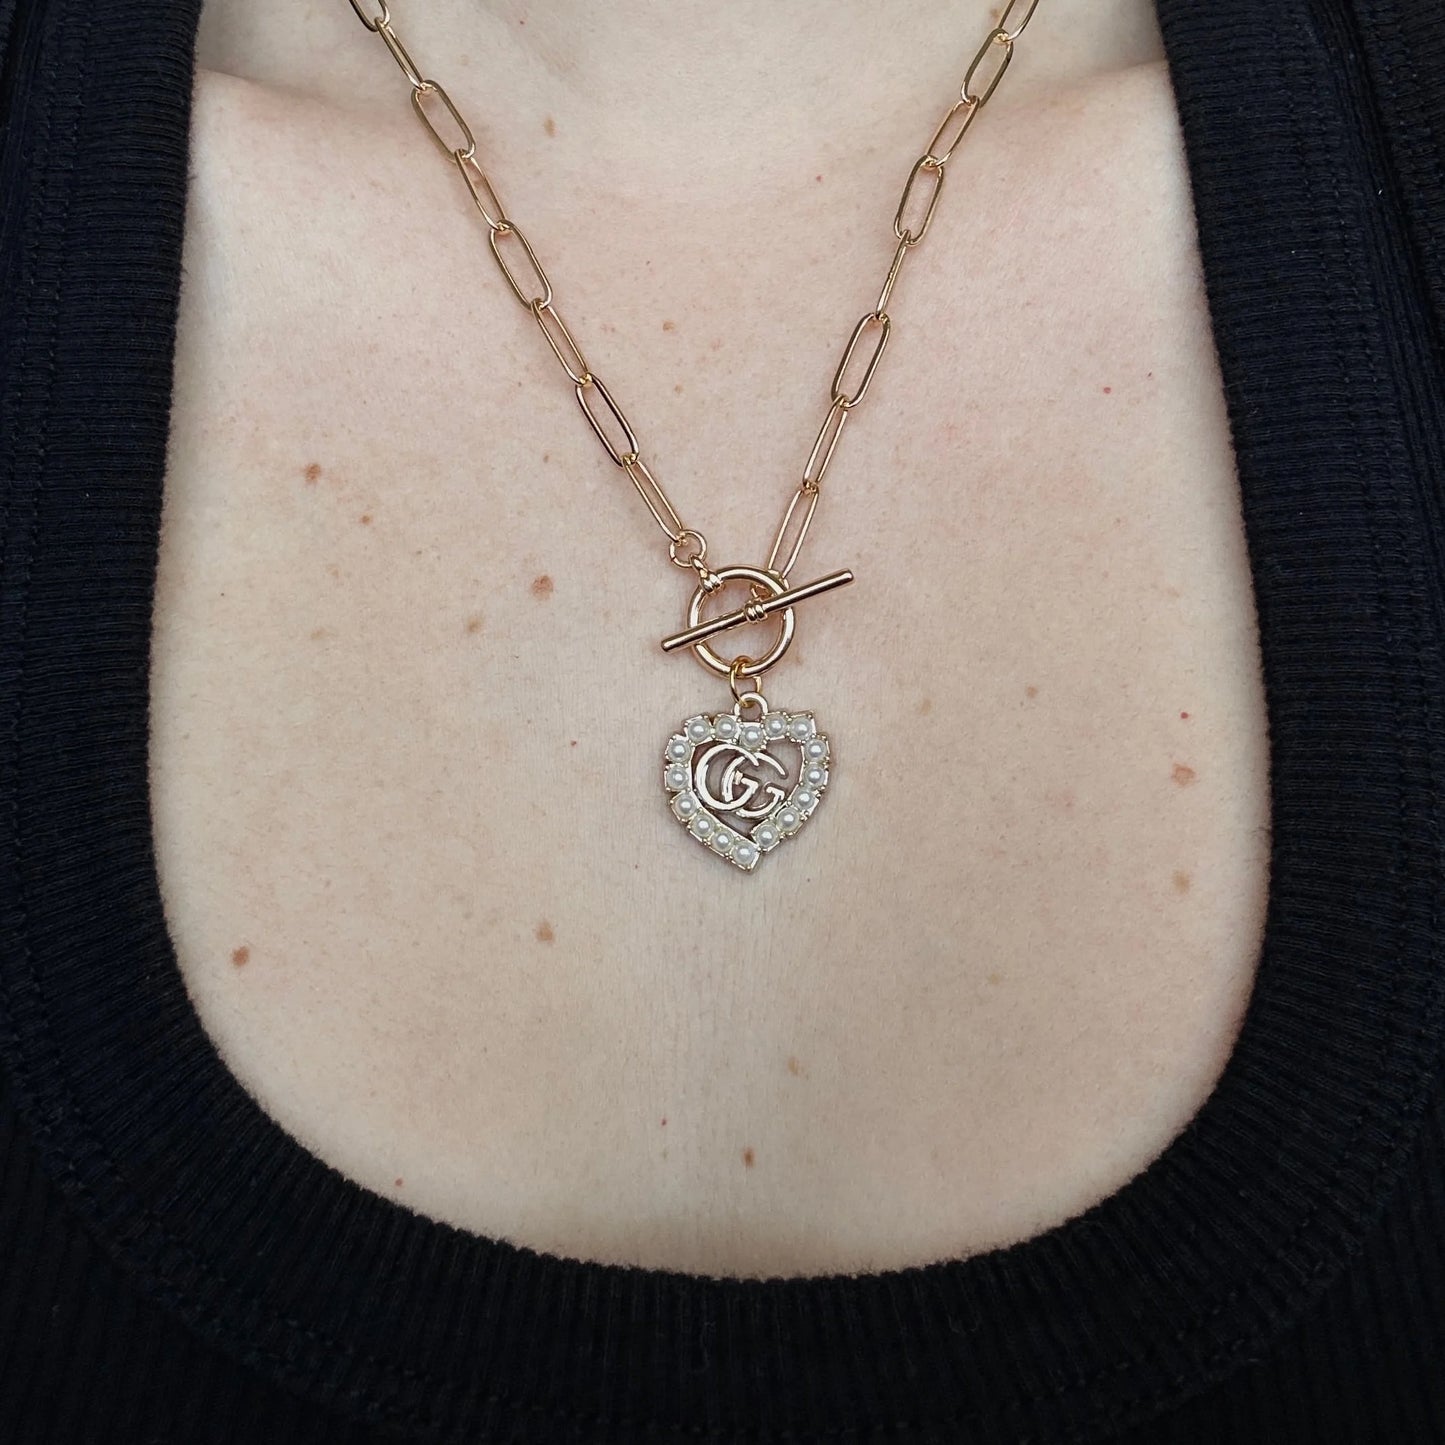 Repurposed Vintage Gucci Heart Necklace